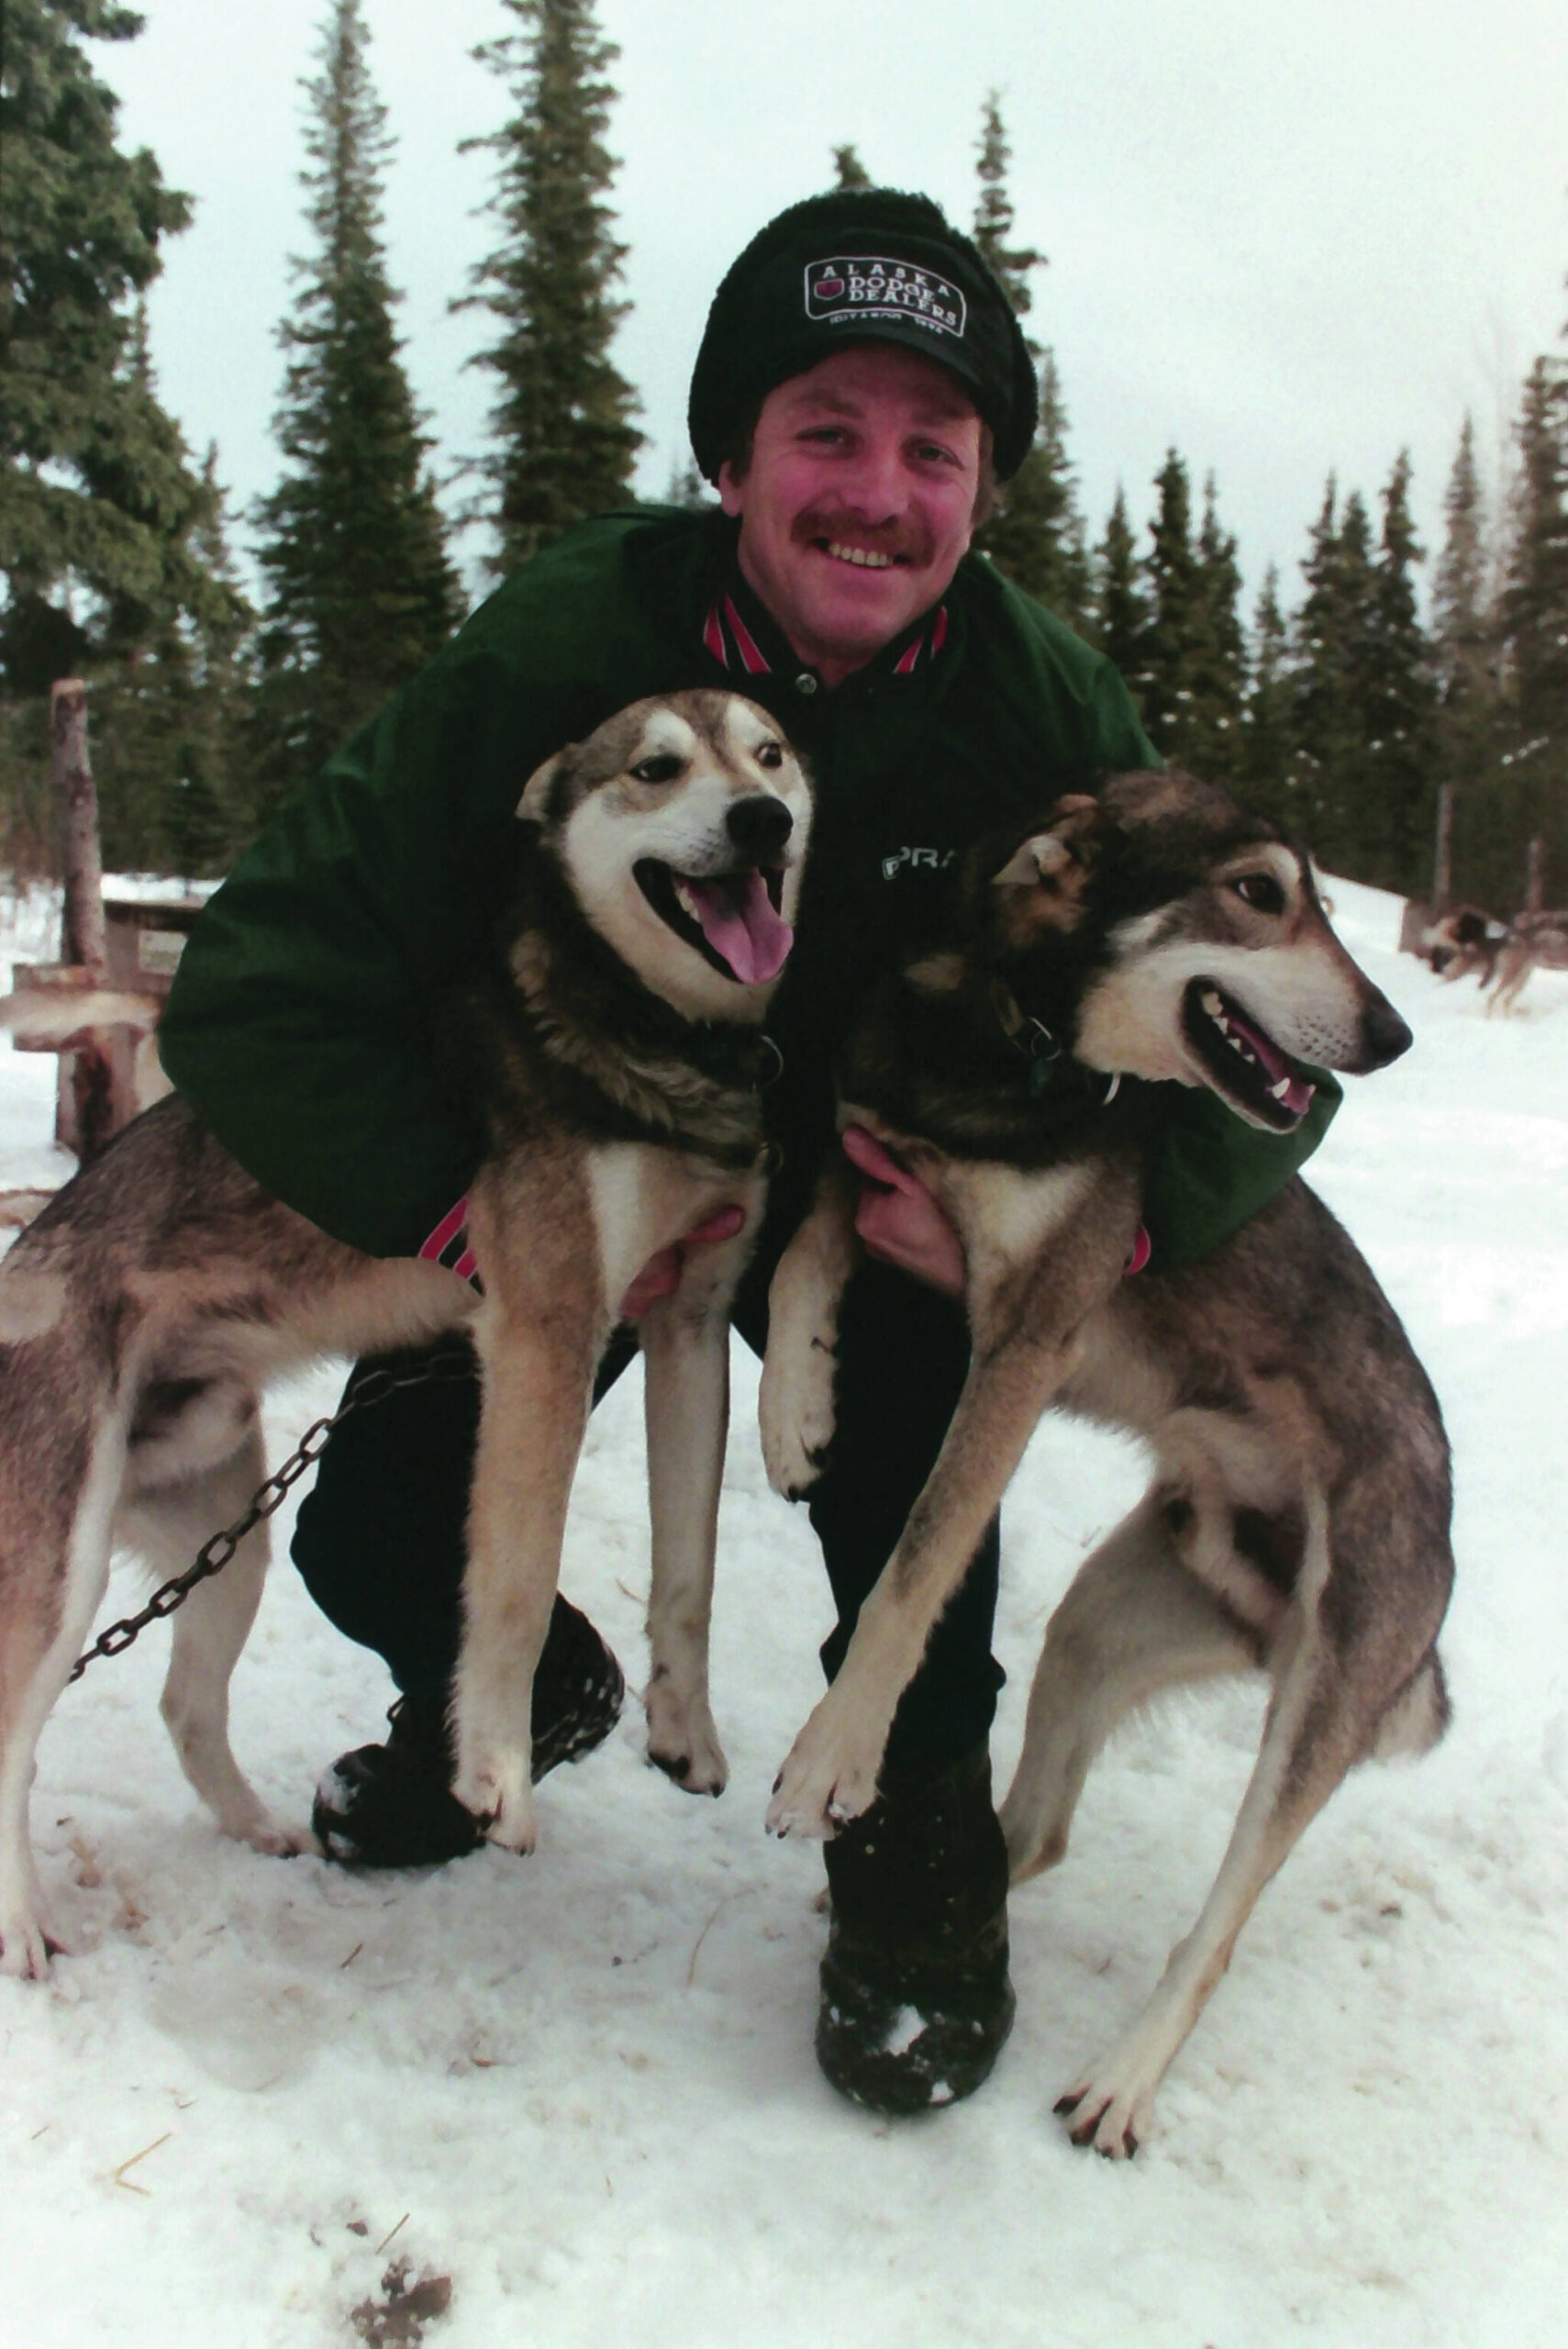 M. Scott Moon/Peninsula Clarion fiile
Paul Gebhardt is photographed with two of his dogs on March 24, 1996.